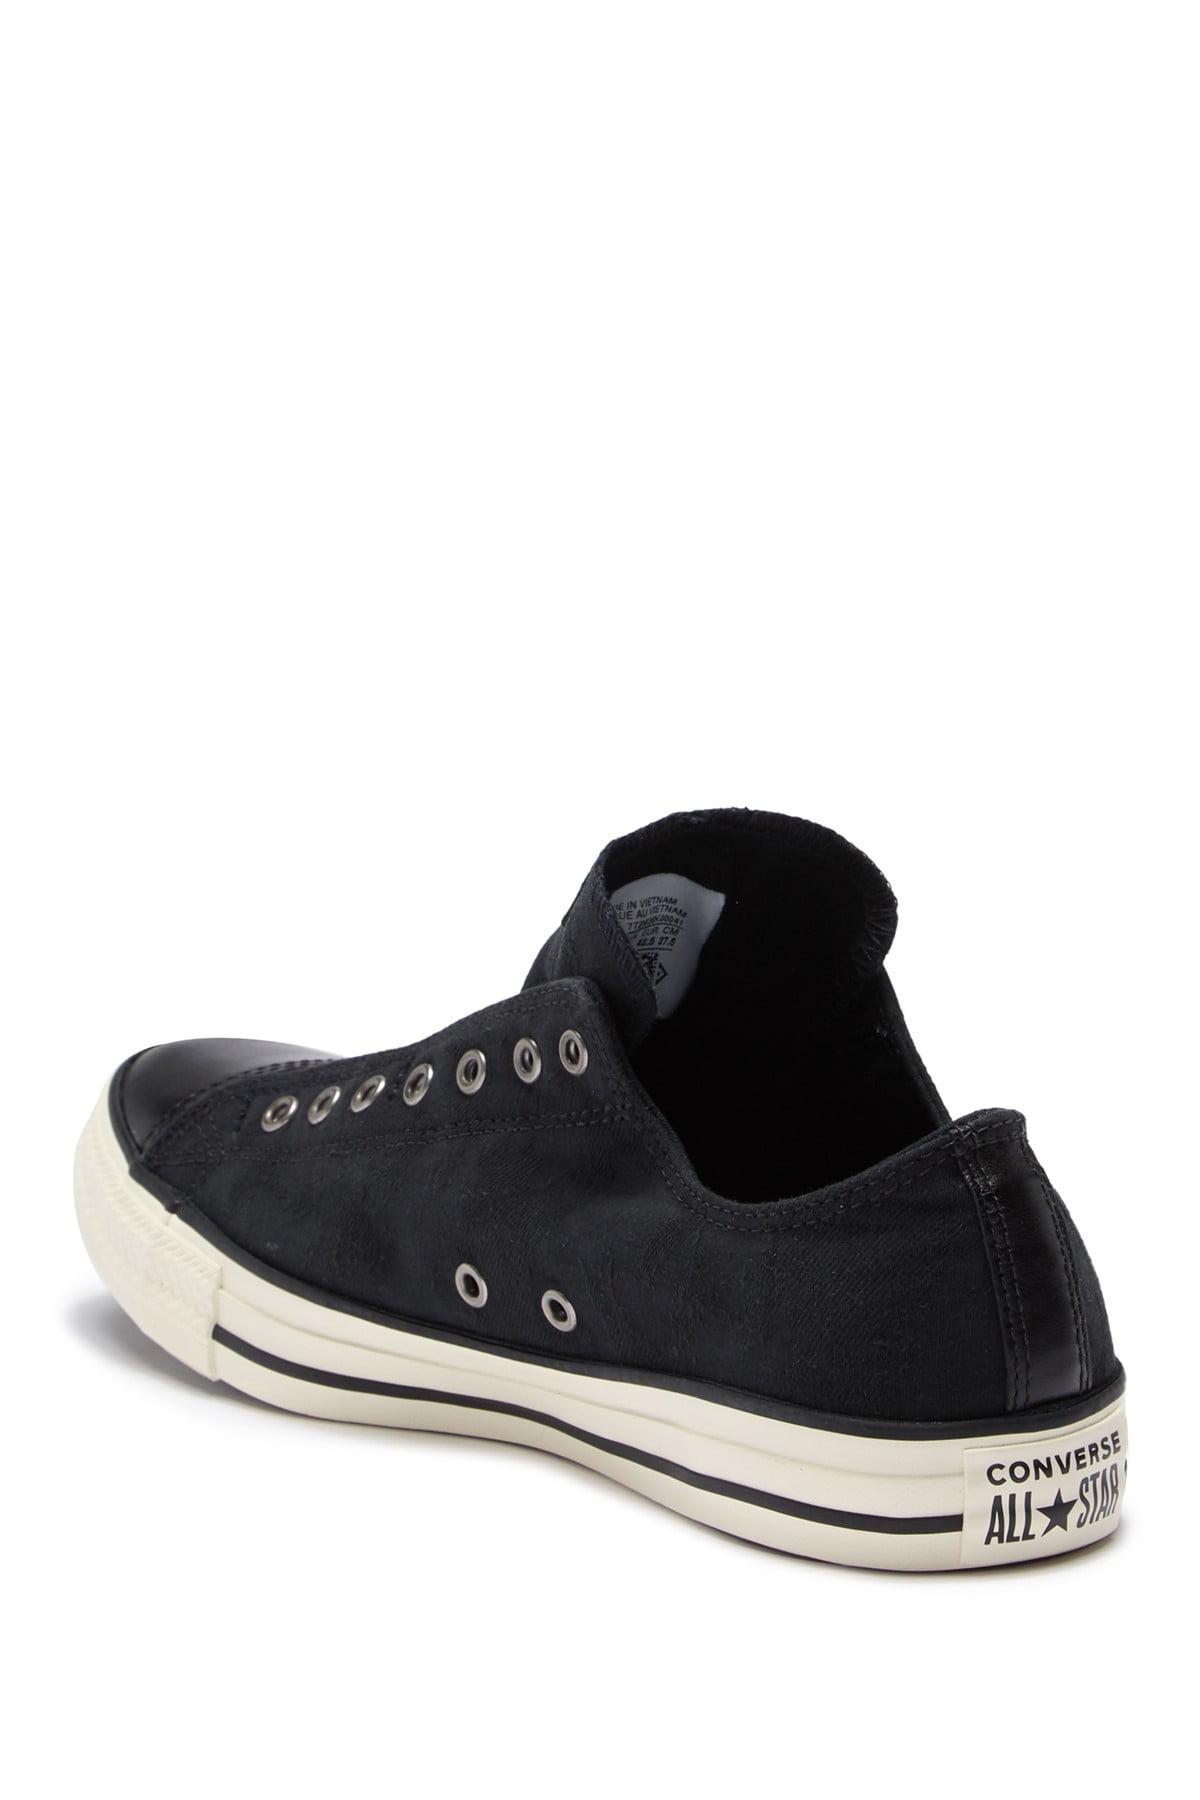 Rafflesia Arnoldi luchthaven dynastie Converse Chuck Taylor All Star Slip On Laceless Sneaker in Black for Men |  Lyst